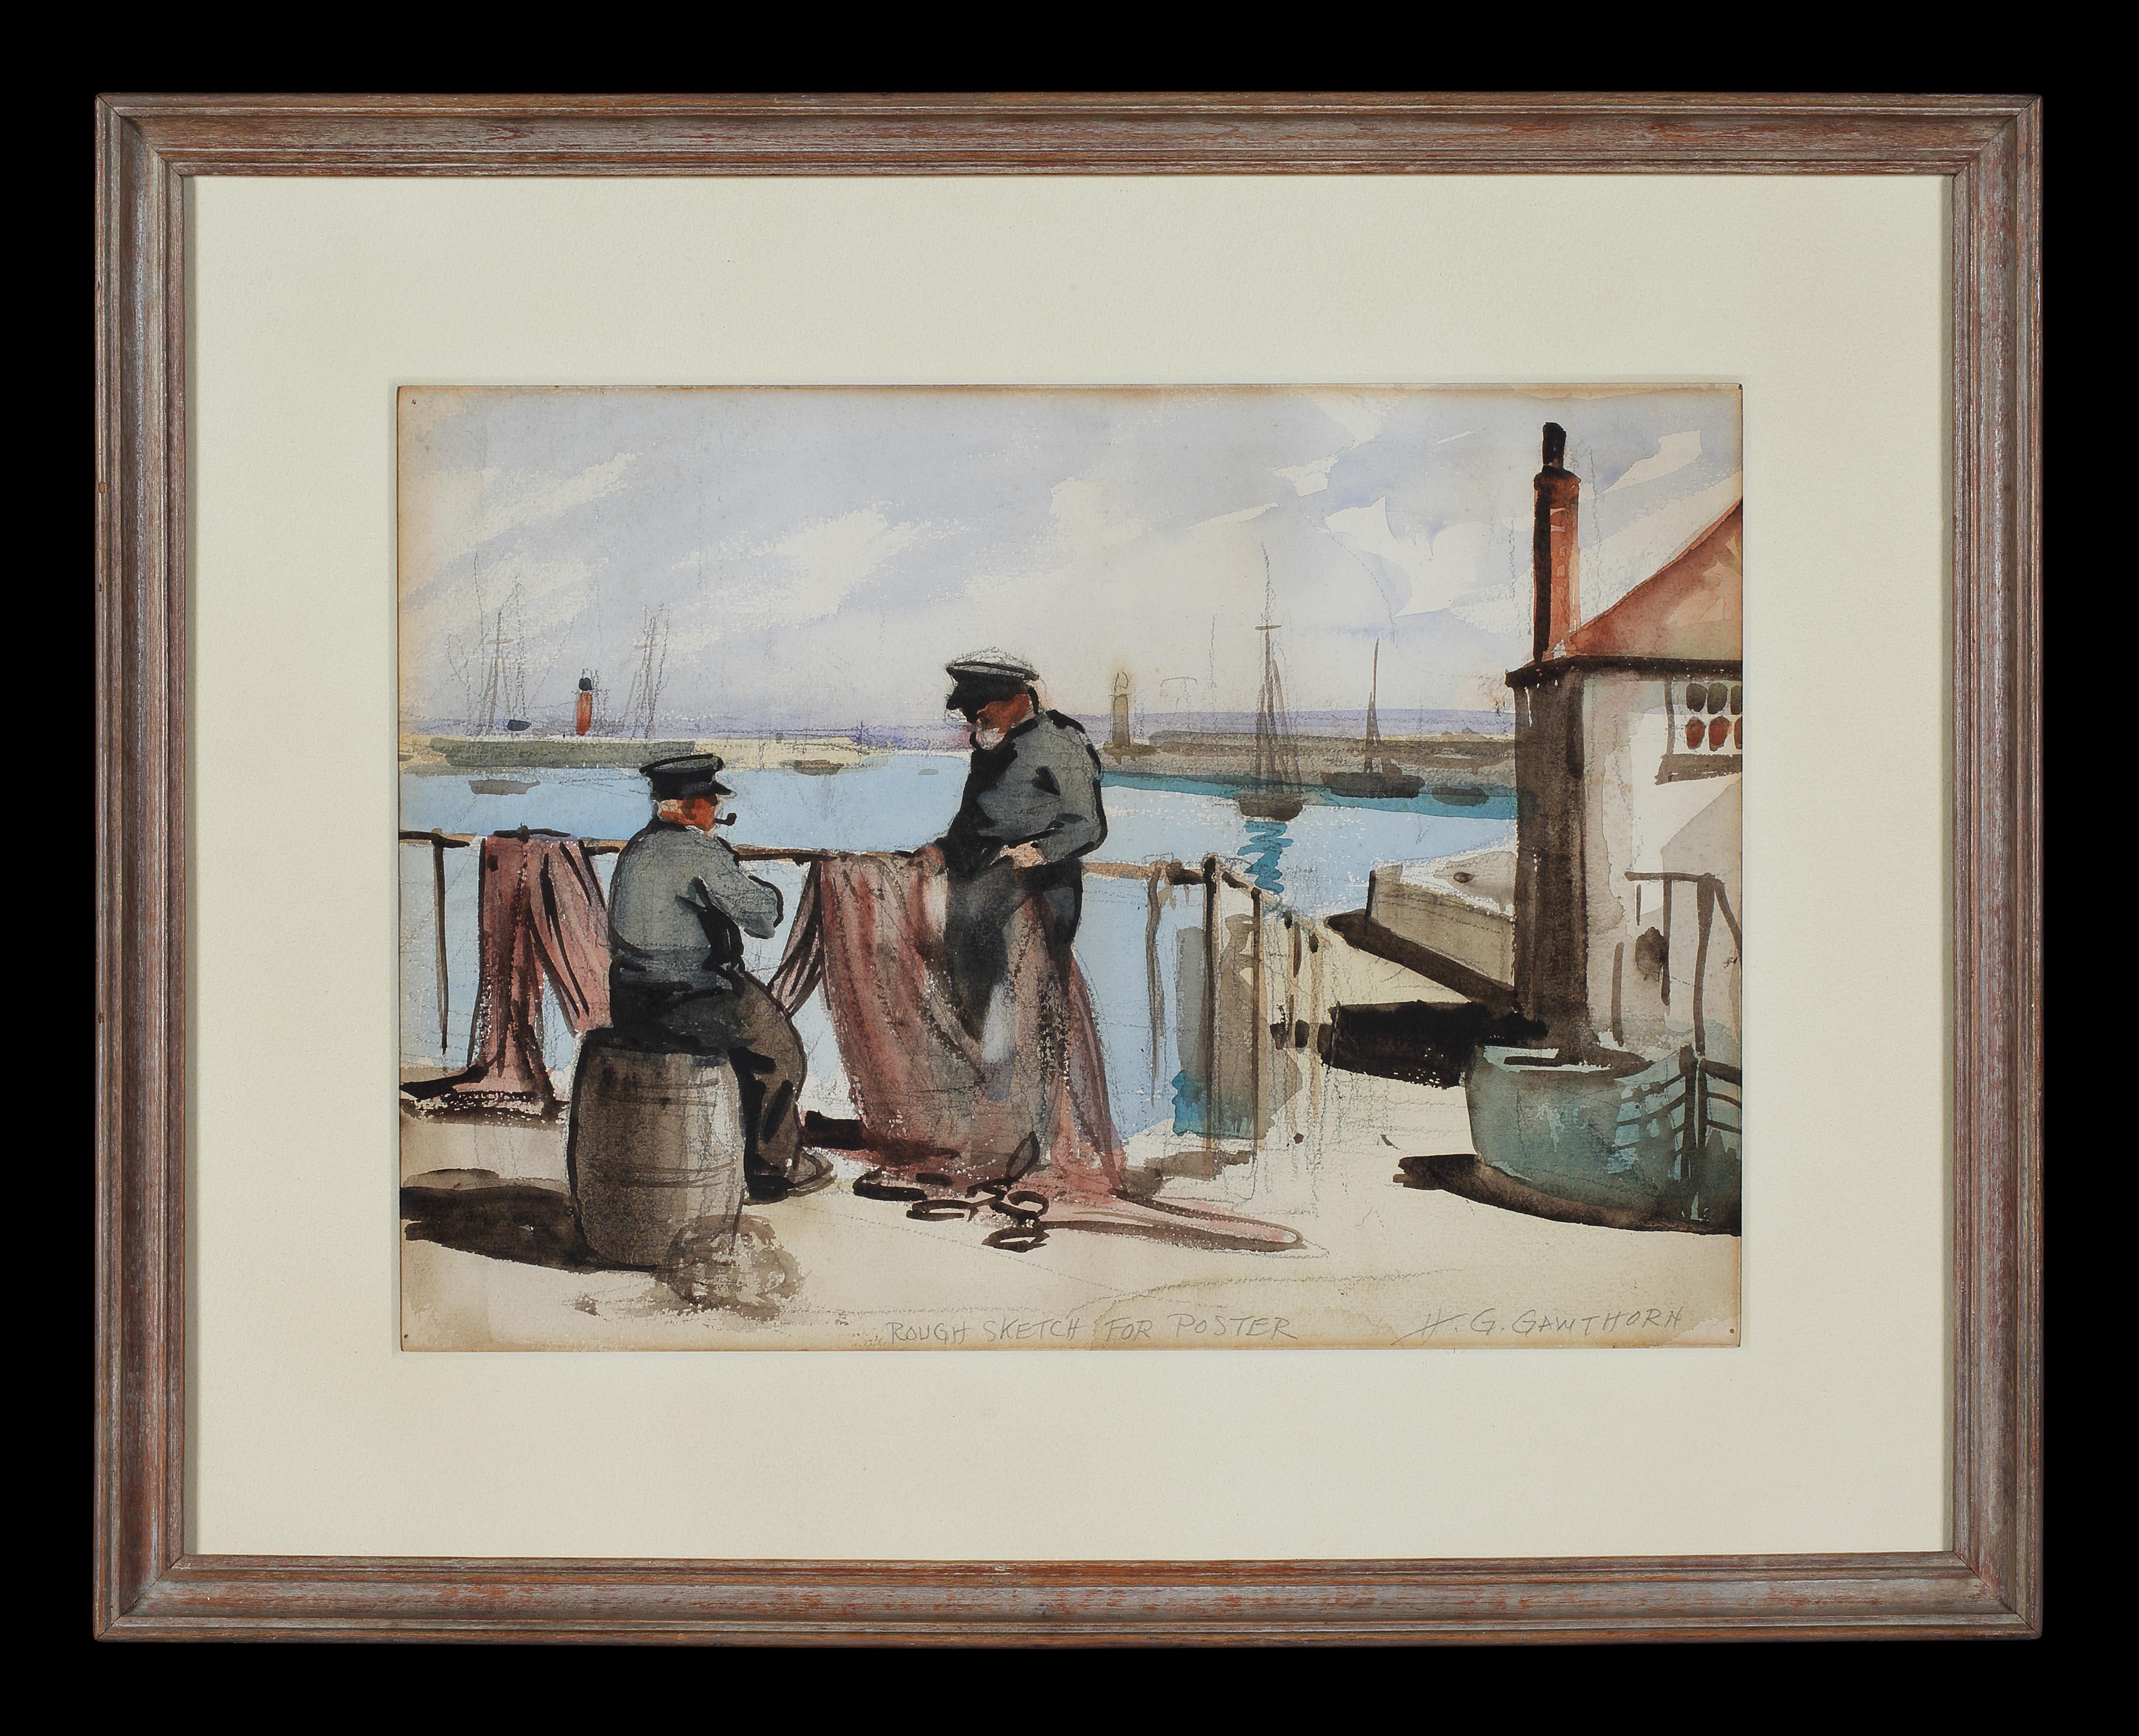 Henry George Gawthorn (1879–1941)

Rare watercolor study of two fishermen examining a large fishing net in the harbour. Inscribed ‘rough sketch for poster’ & signed H G Gawthorn in pencil. With a pencil sketch of one of the fishermen on the